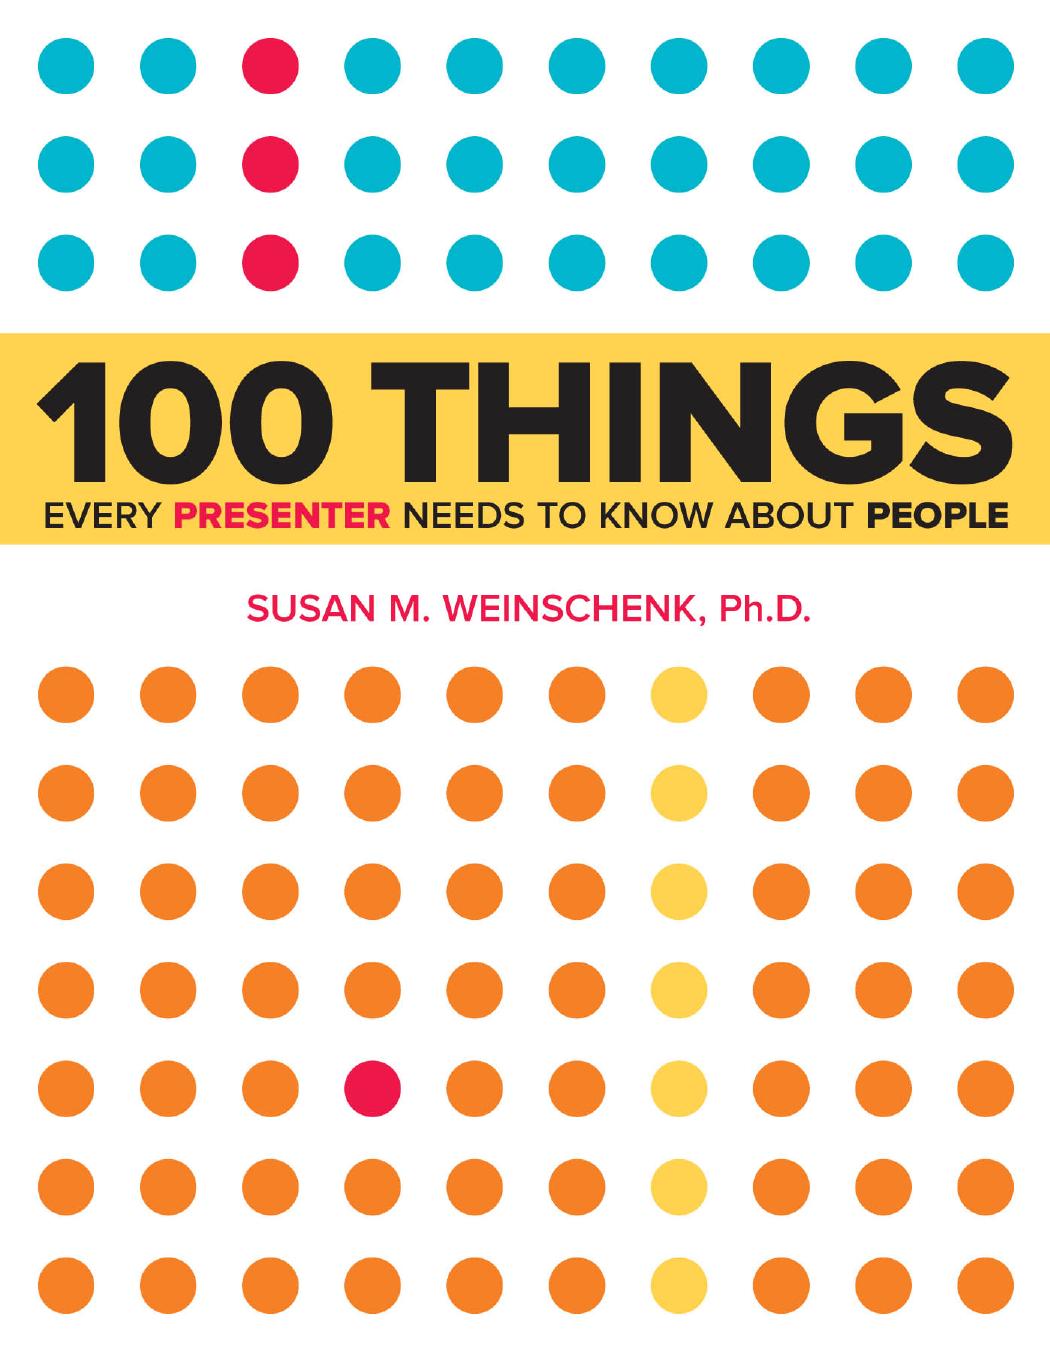 100 Things Every Presenter Needs to Know About People.jpg